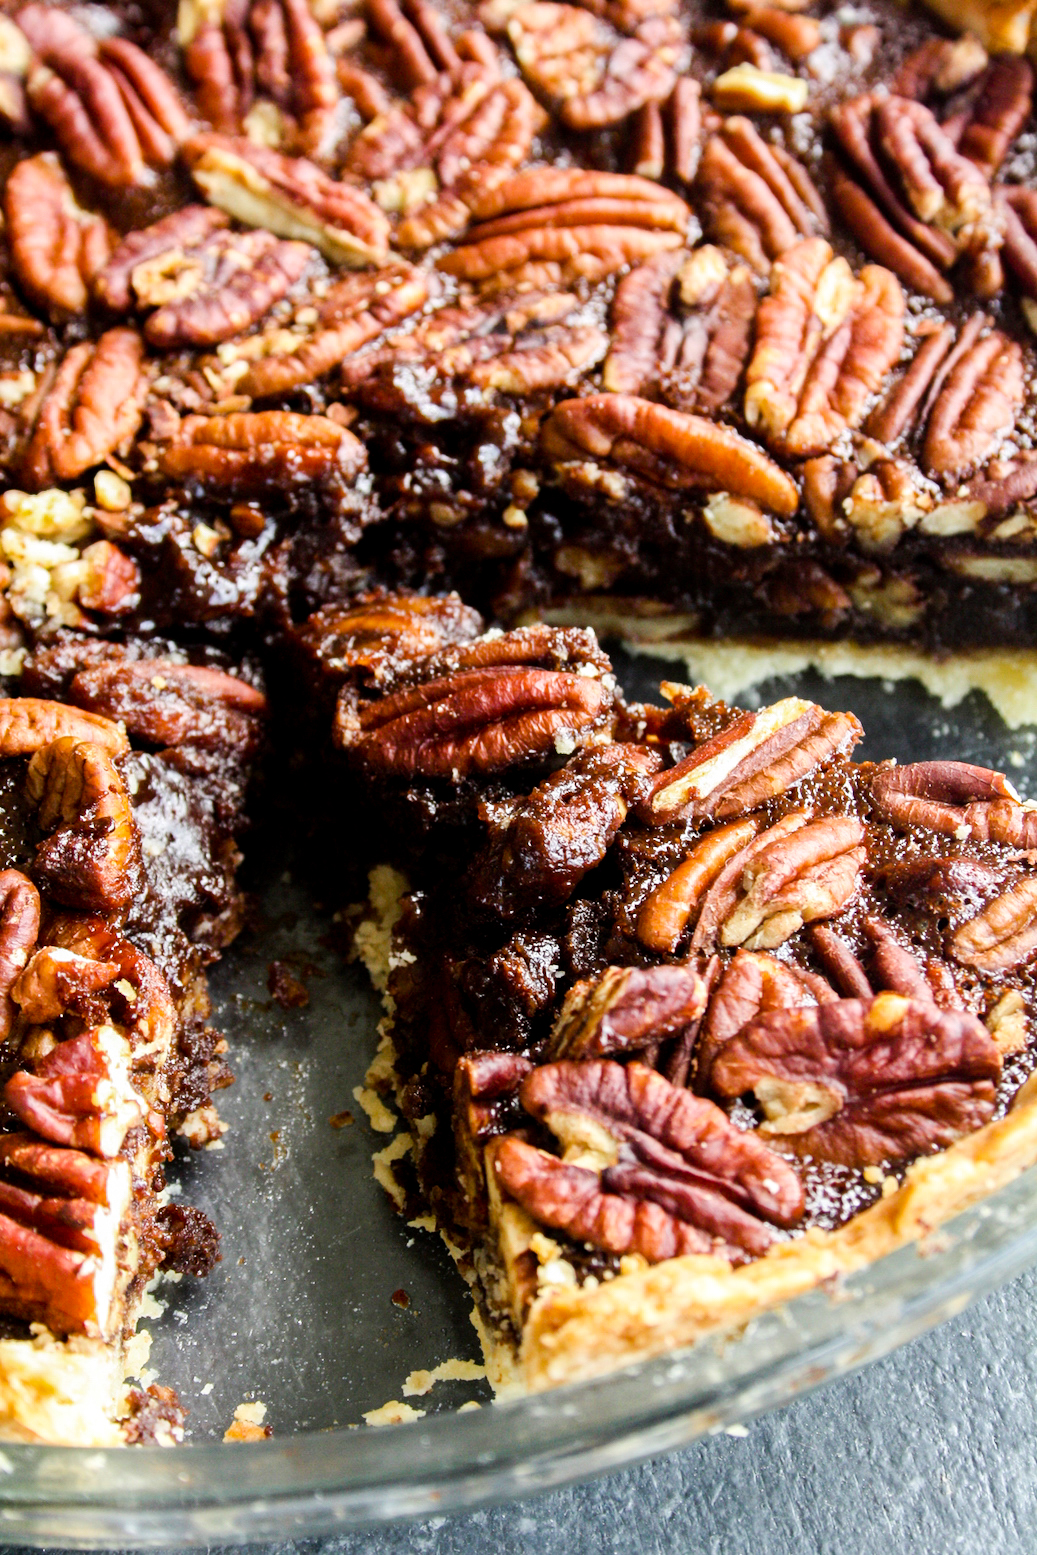 Rich and gooey dark chocolate pecan pie made with honey not corn syrup, on a homemade flaky pie crust